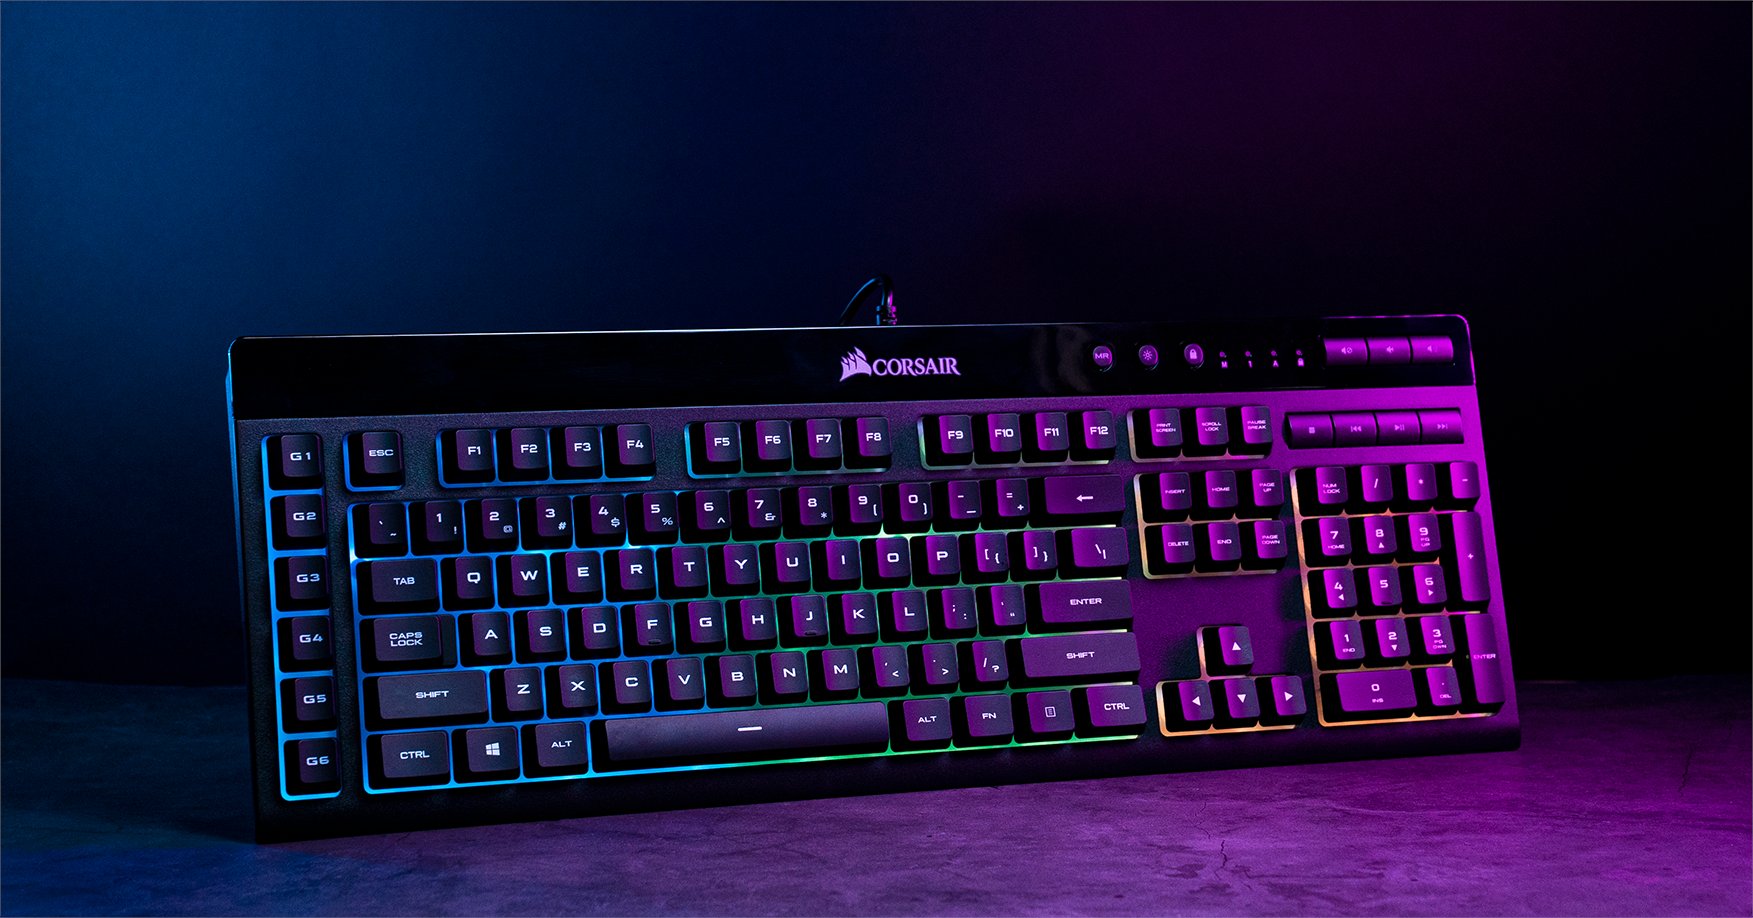 Elgato Twitter: "Stream Deck is now available for the @CORSAIR K55 RGB keyboard! Use your keyboard's G Keys with Stream Deck software take your content to the next level. ➡https://t.co/Cld6PUm8B5